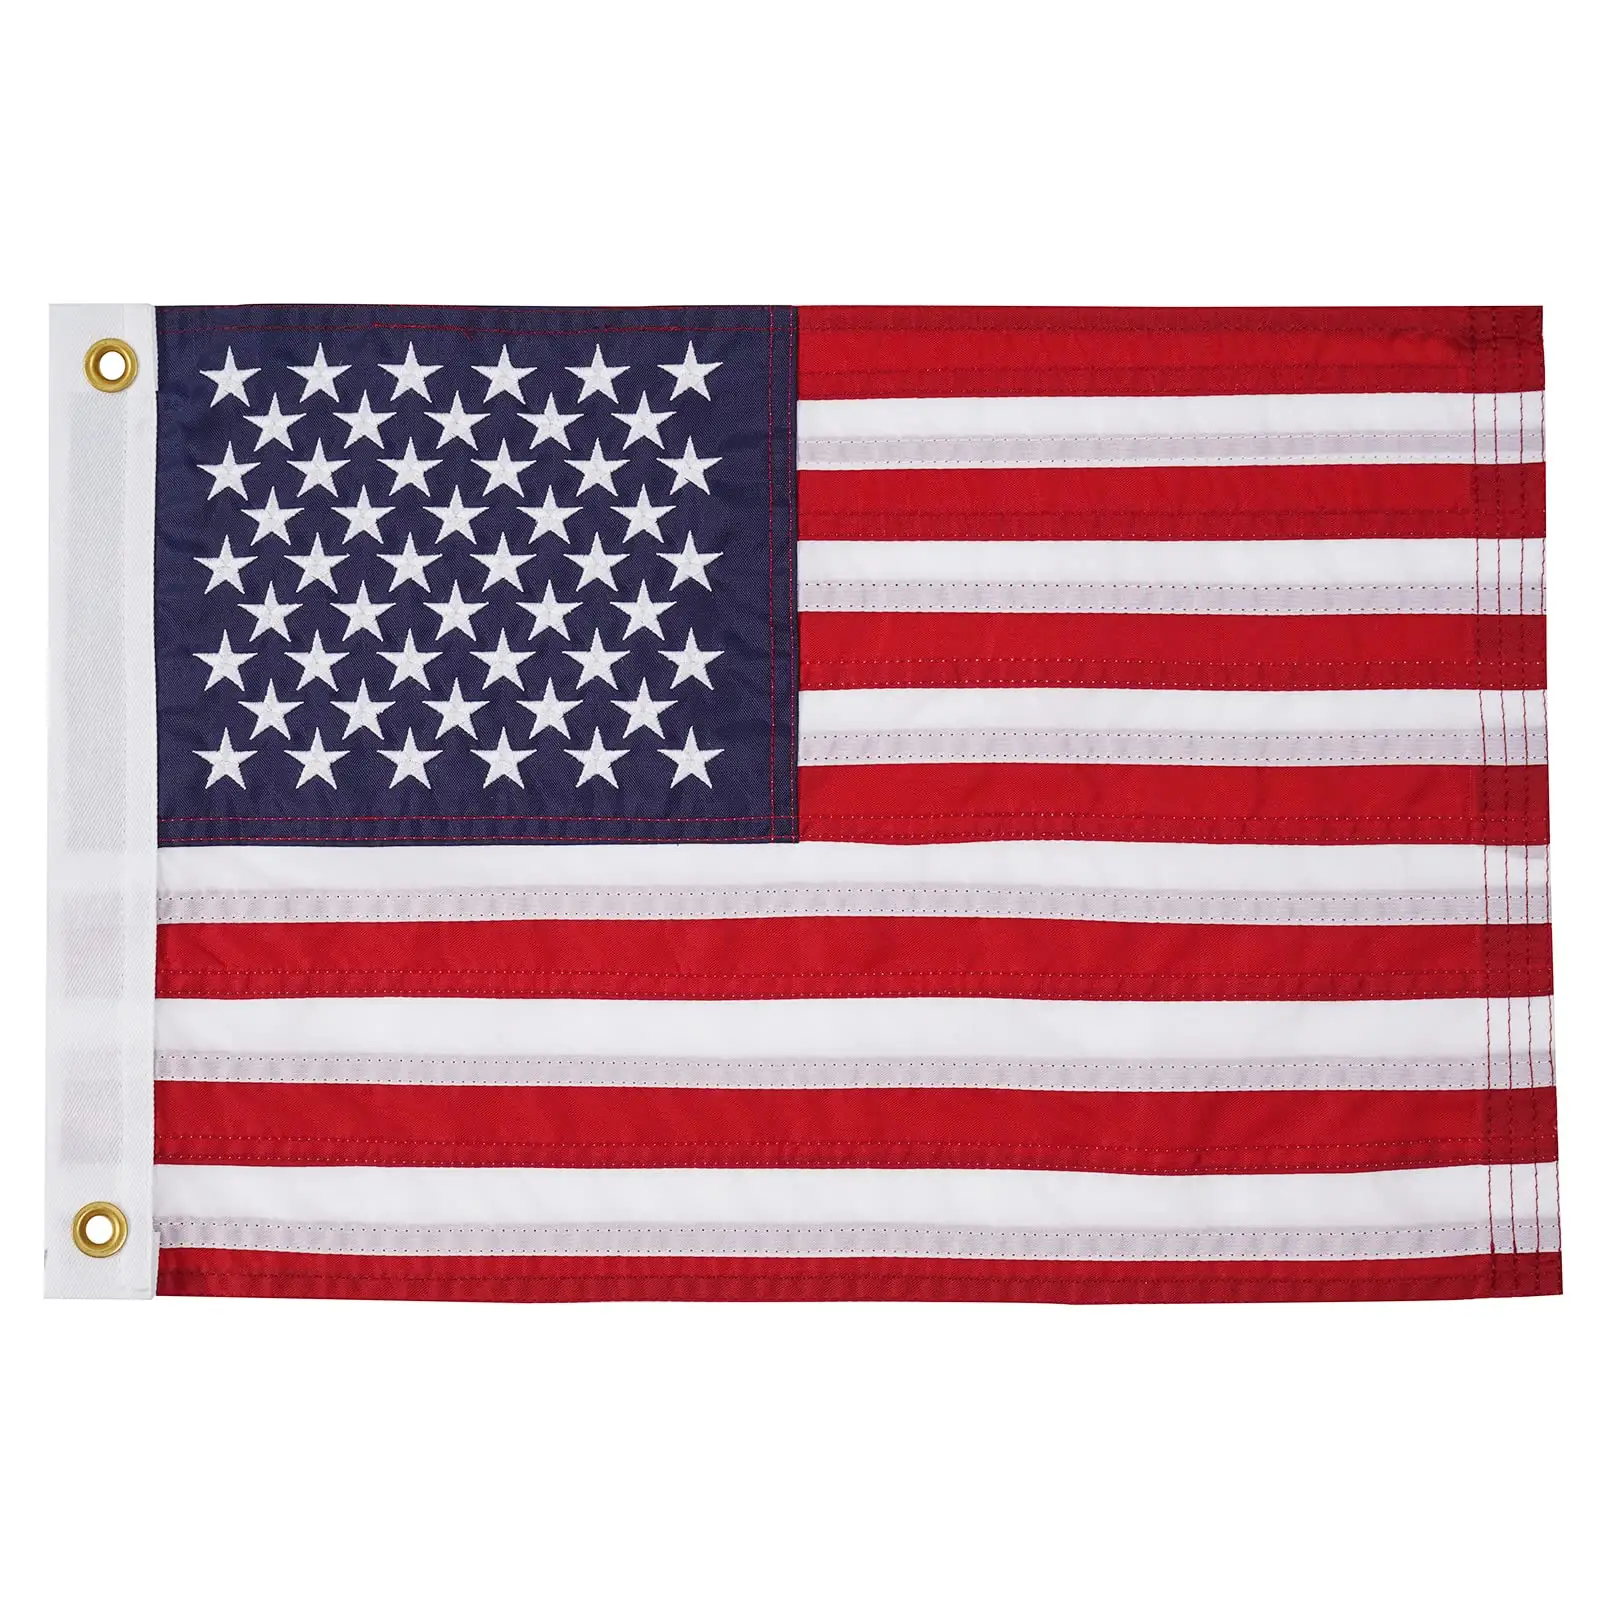 Heavy Duty 210D Nylon America Boat Flag 12x18 inches Embroidered Star US USA Boat Flags